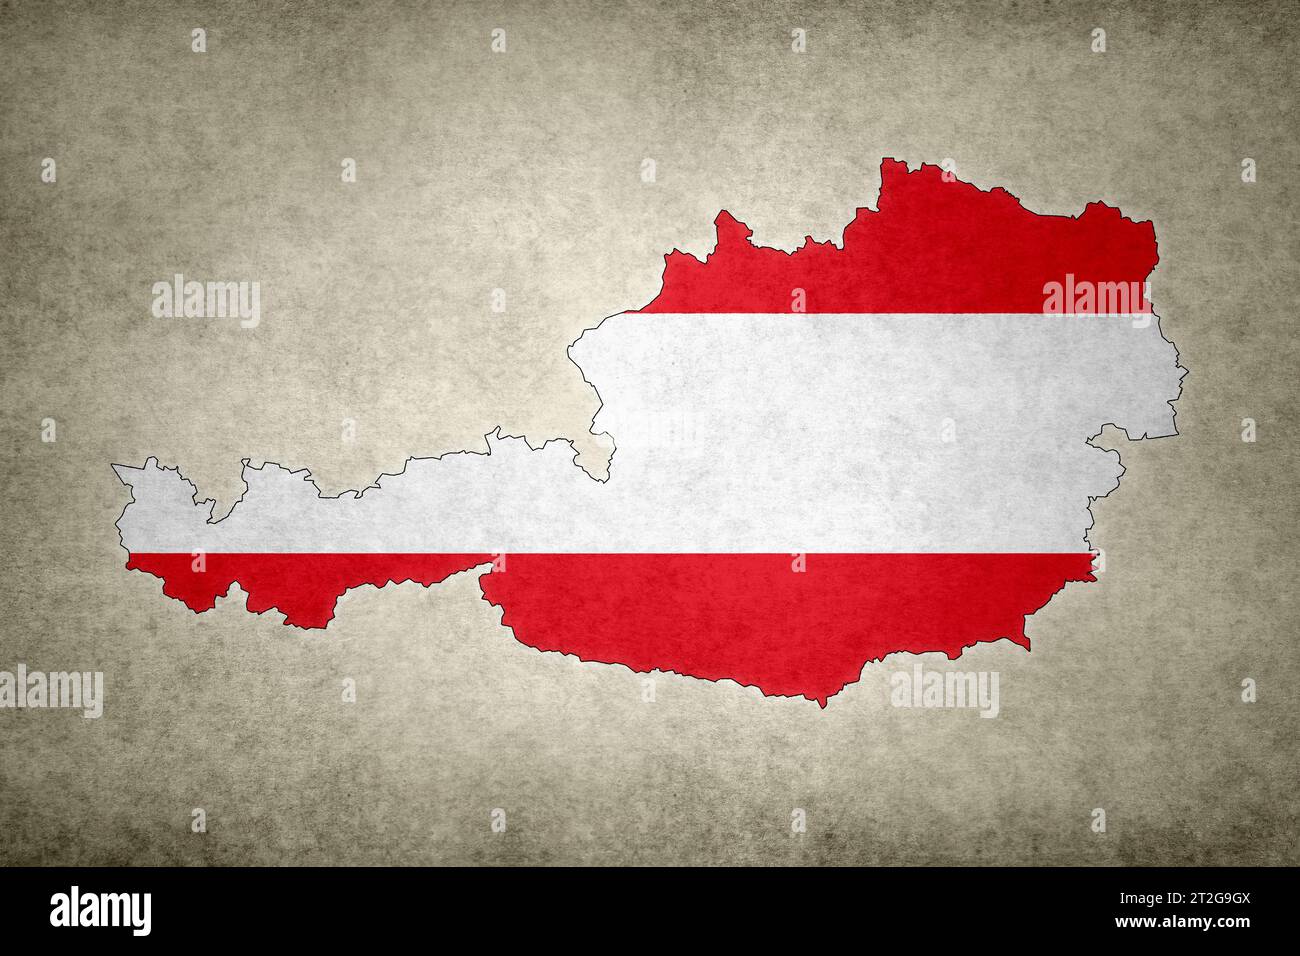 Grunge map of Austria with its flag printed within its border on an old paper. Stock Photo